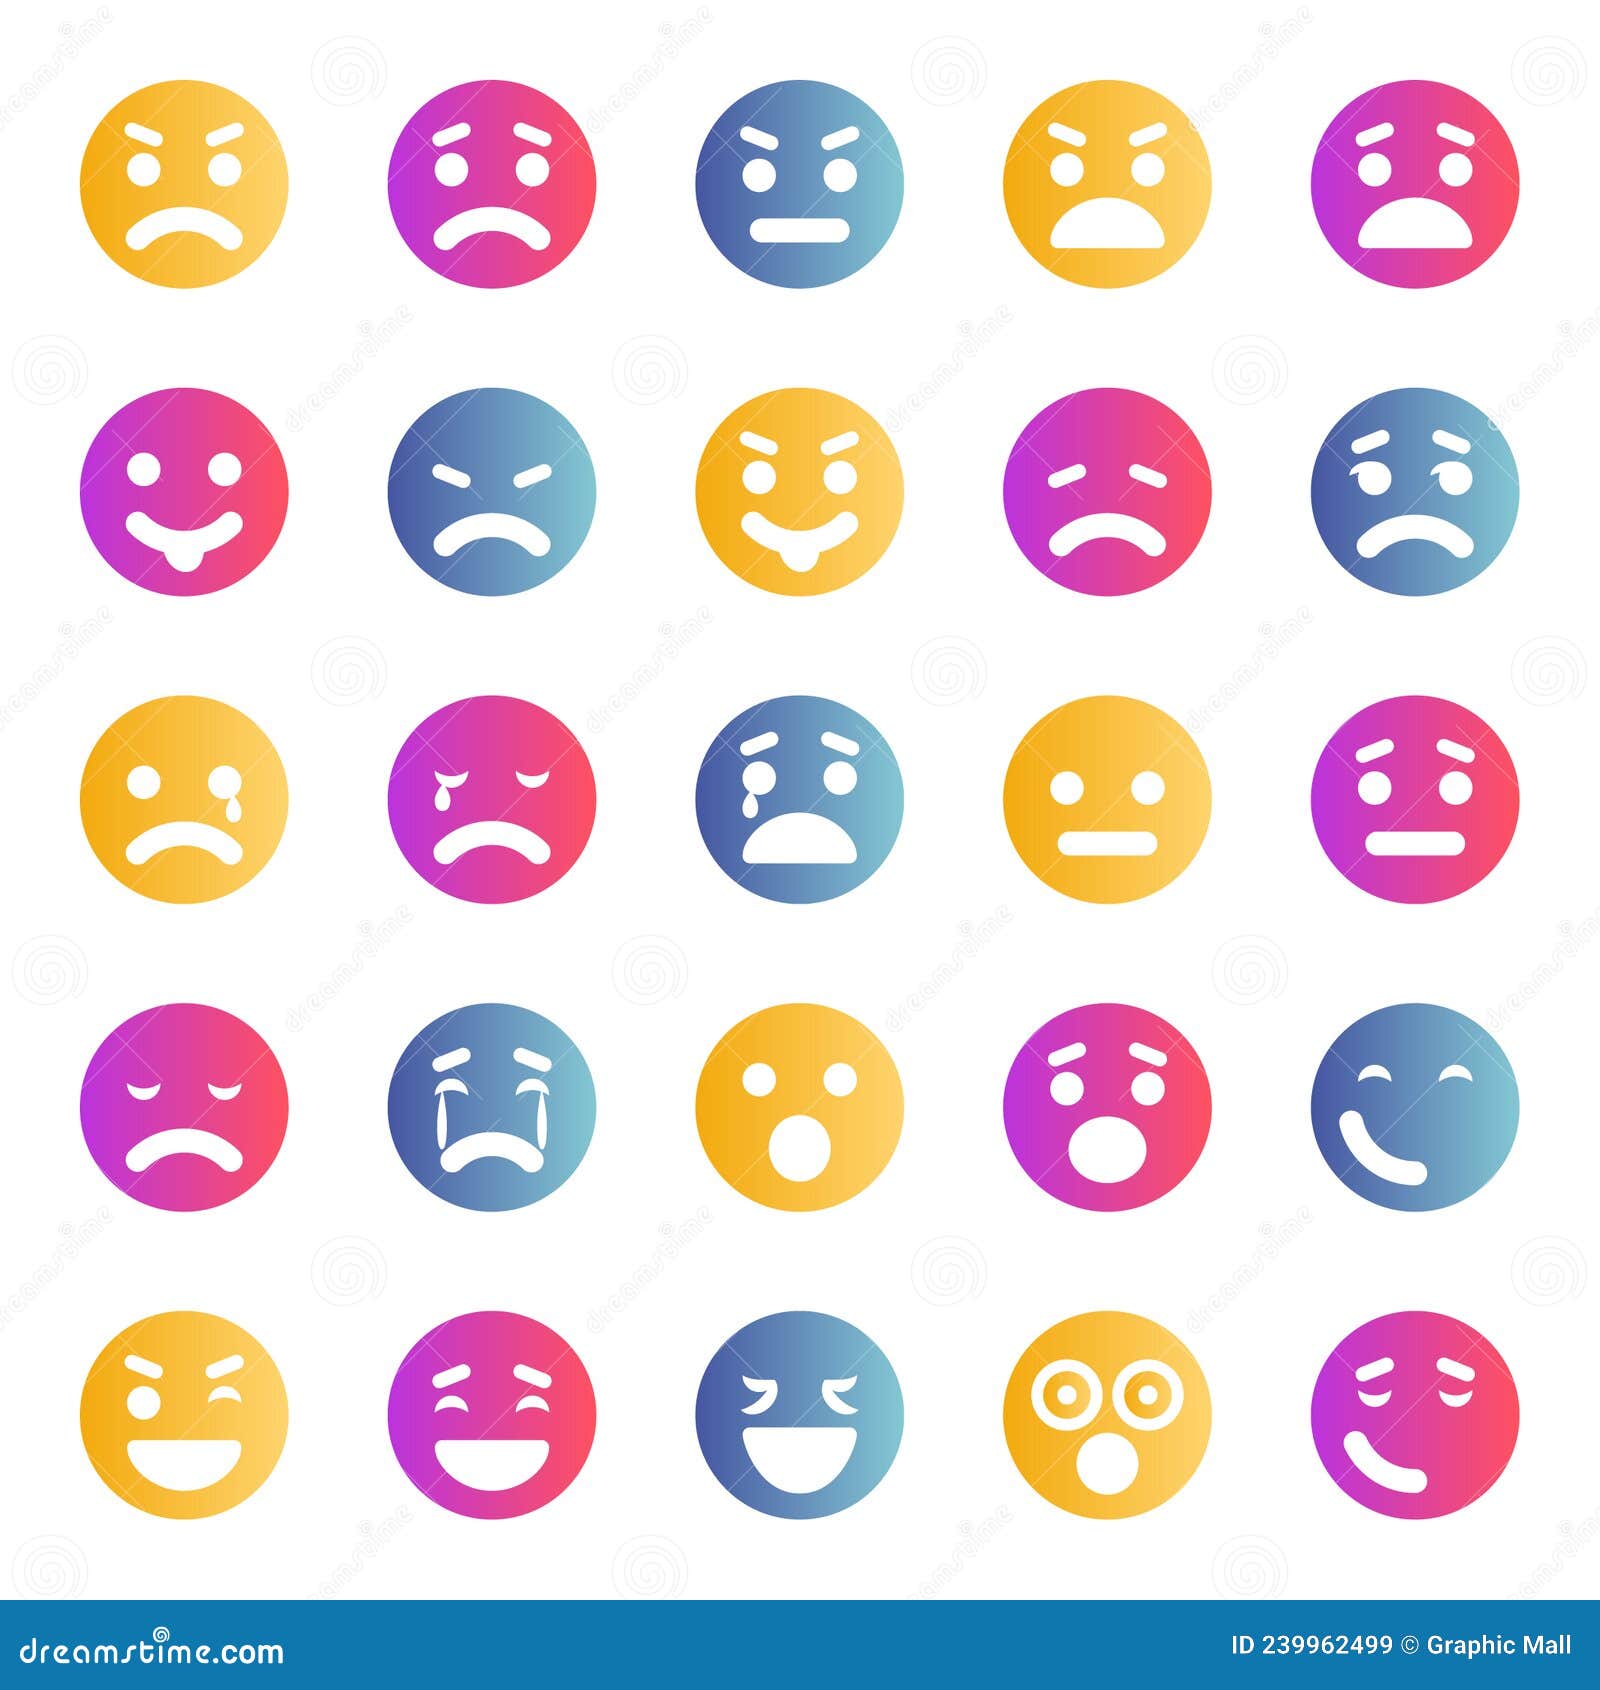 Gradient Color Icons for Smiley Face. Stock Vector - Illustration of ...